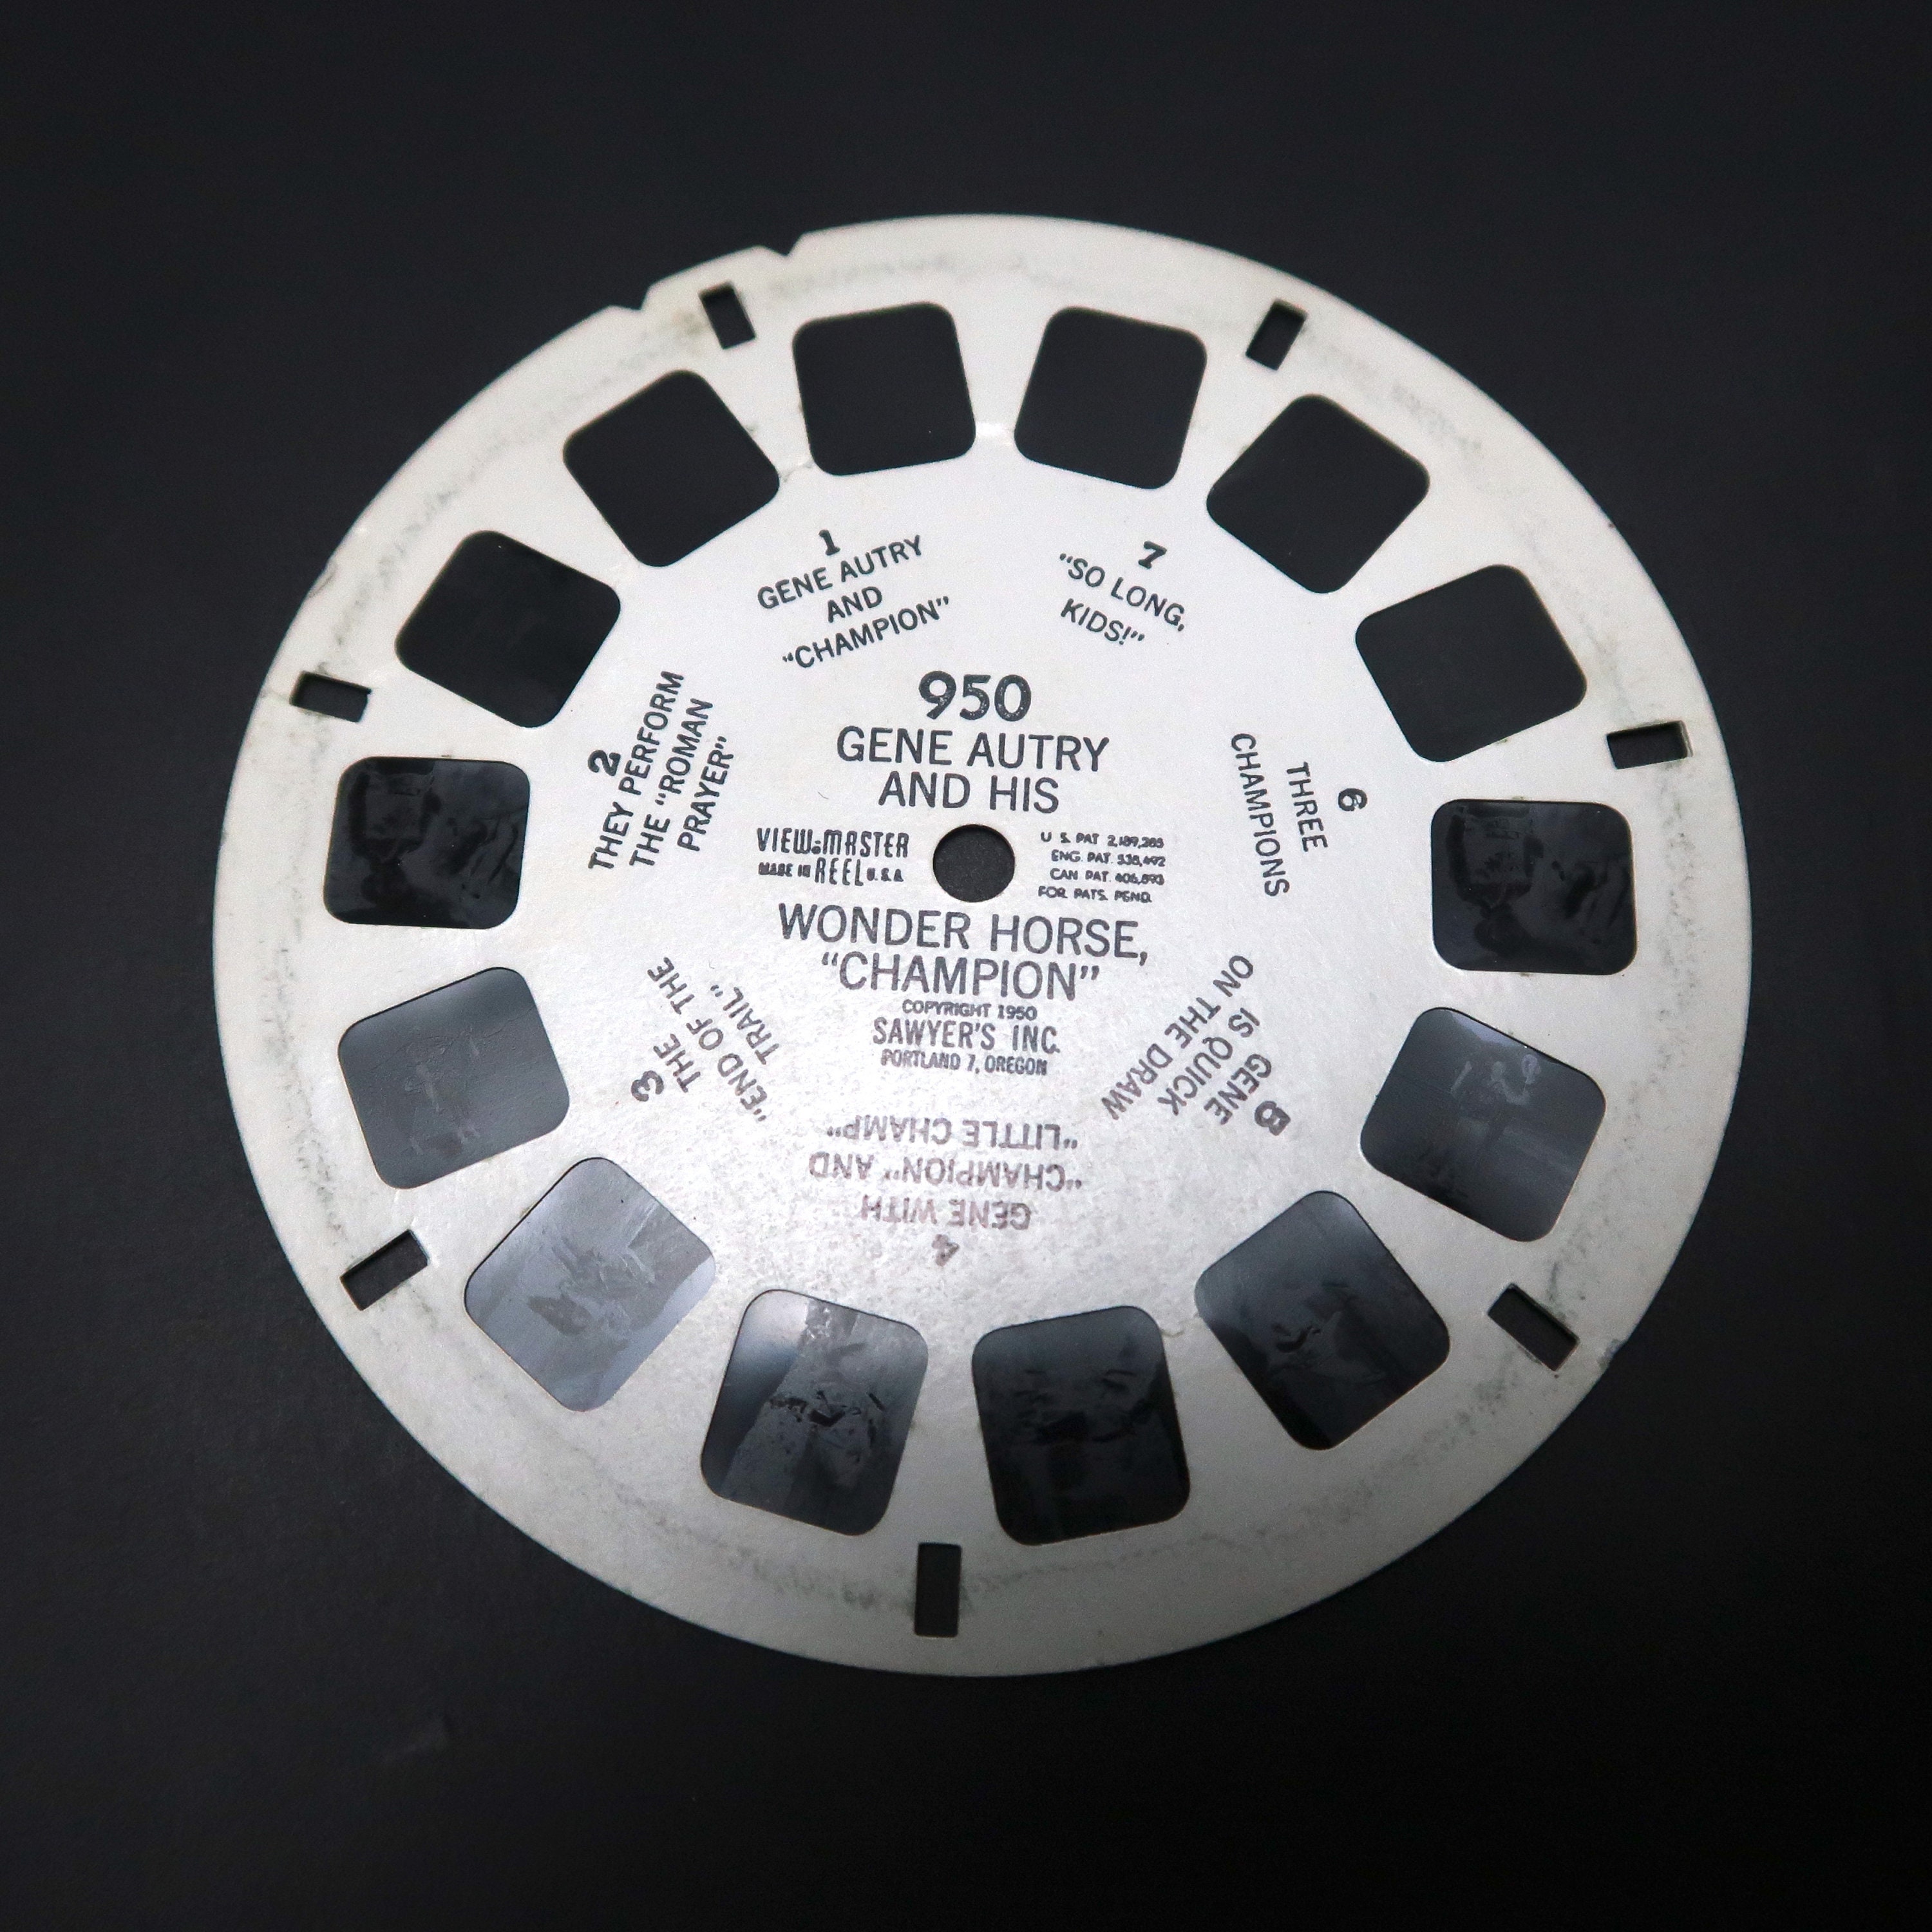 View-master Reel 950 Gene Autry and His Wonder Horse Champion T1